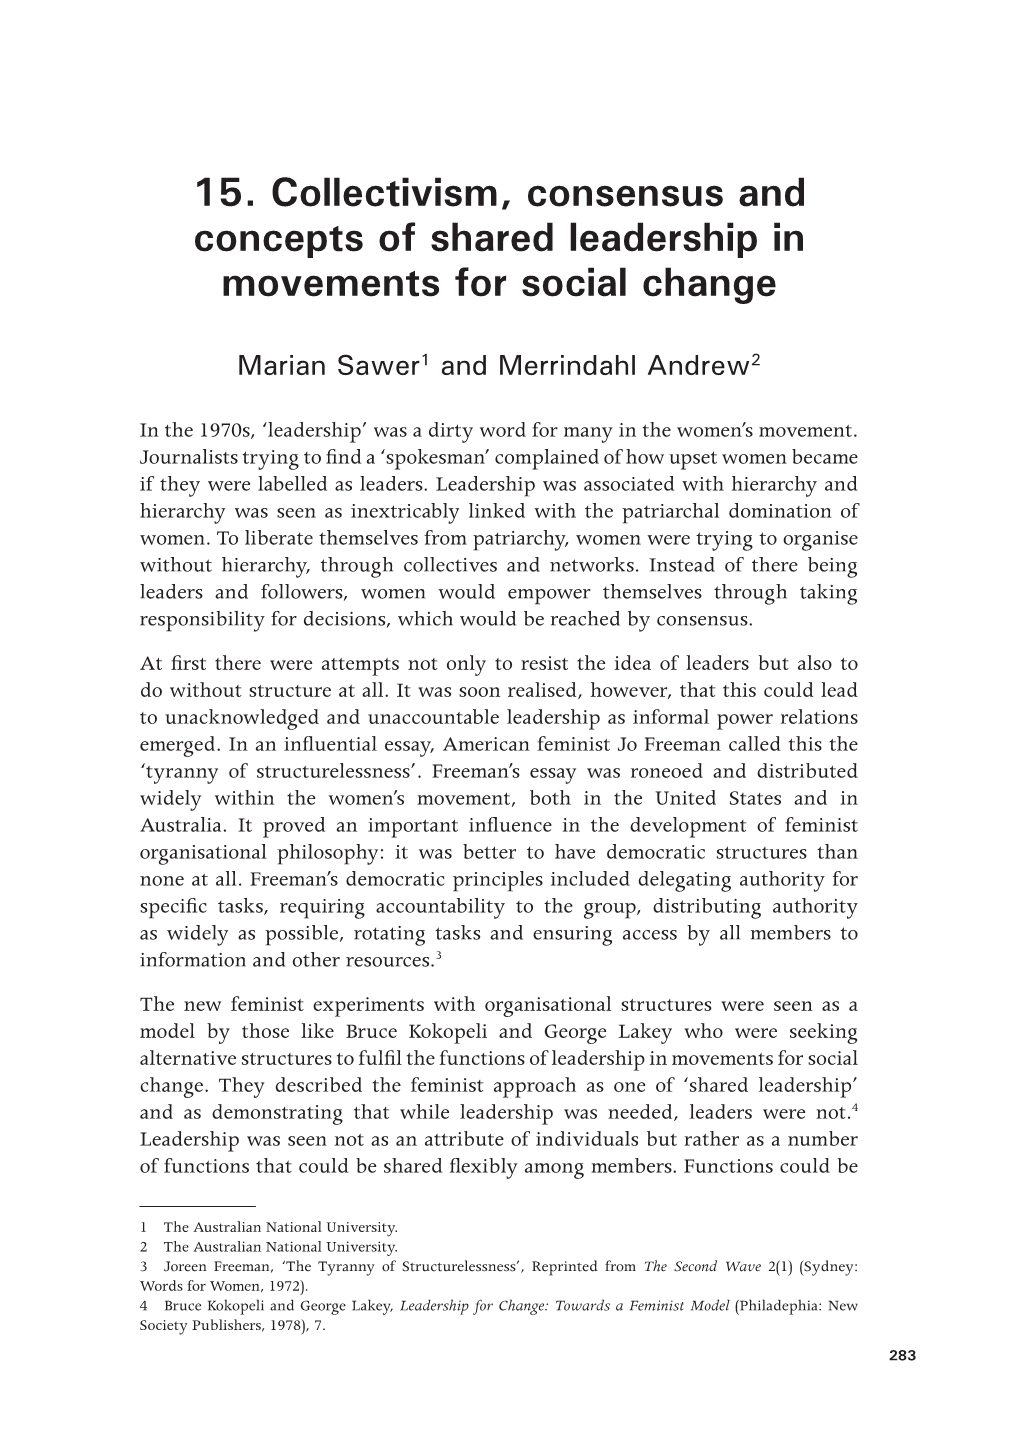 15. Collectivism, Consensus and Concepts of Shared Leadership in Movements for Social Change